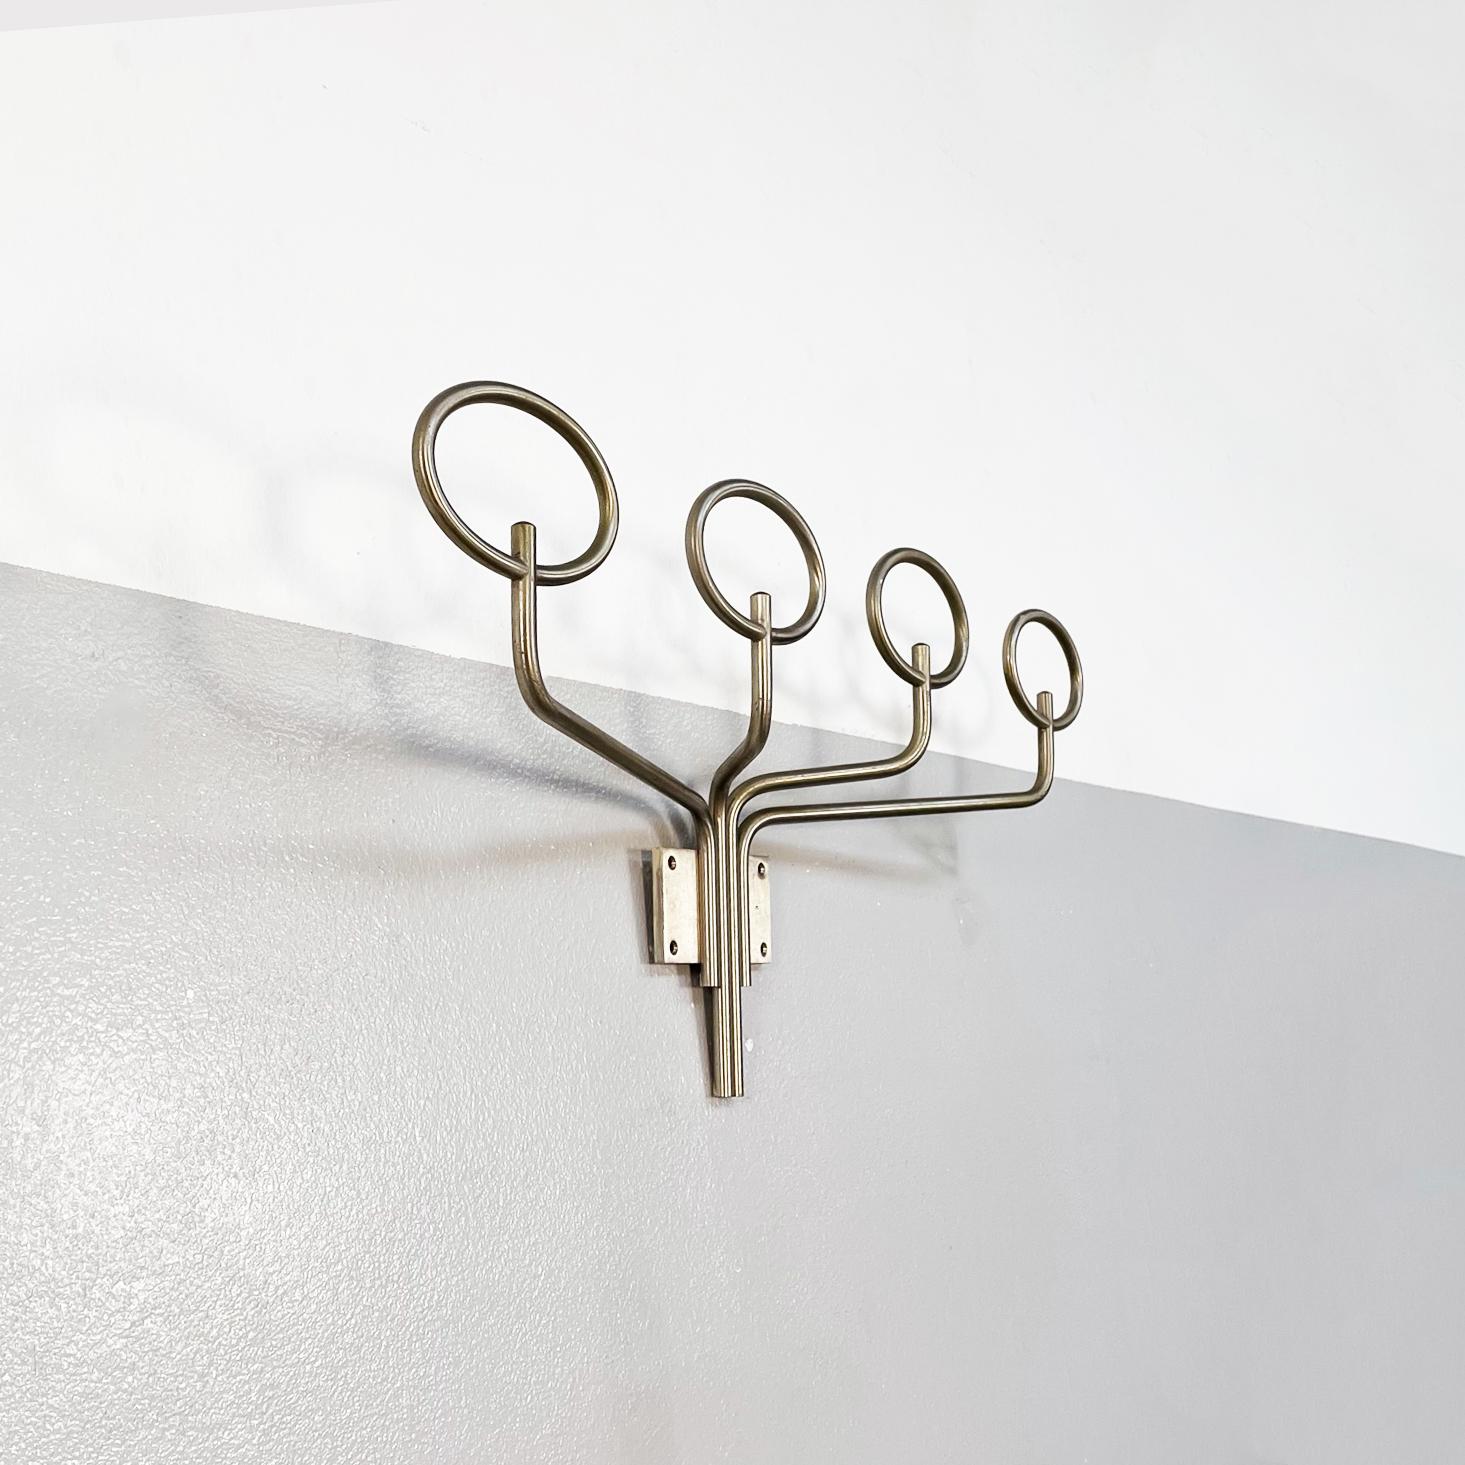 Italian mid-century Clitoquattro wall coat by Graminia and Mazza for Artemide, 1960s
Clitoquattro wall coat hooks composed of four oval-shaped hooks. The structure is in tubular nickel.
Produced by Artemide in 1960s and designed by Giuliana